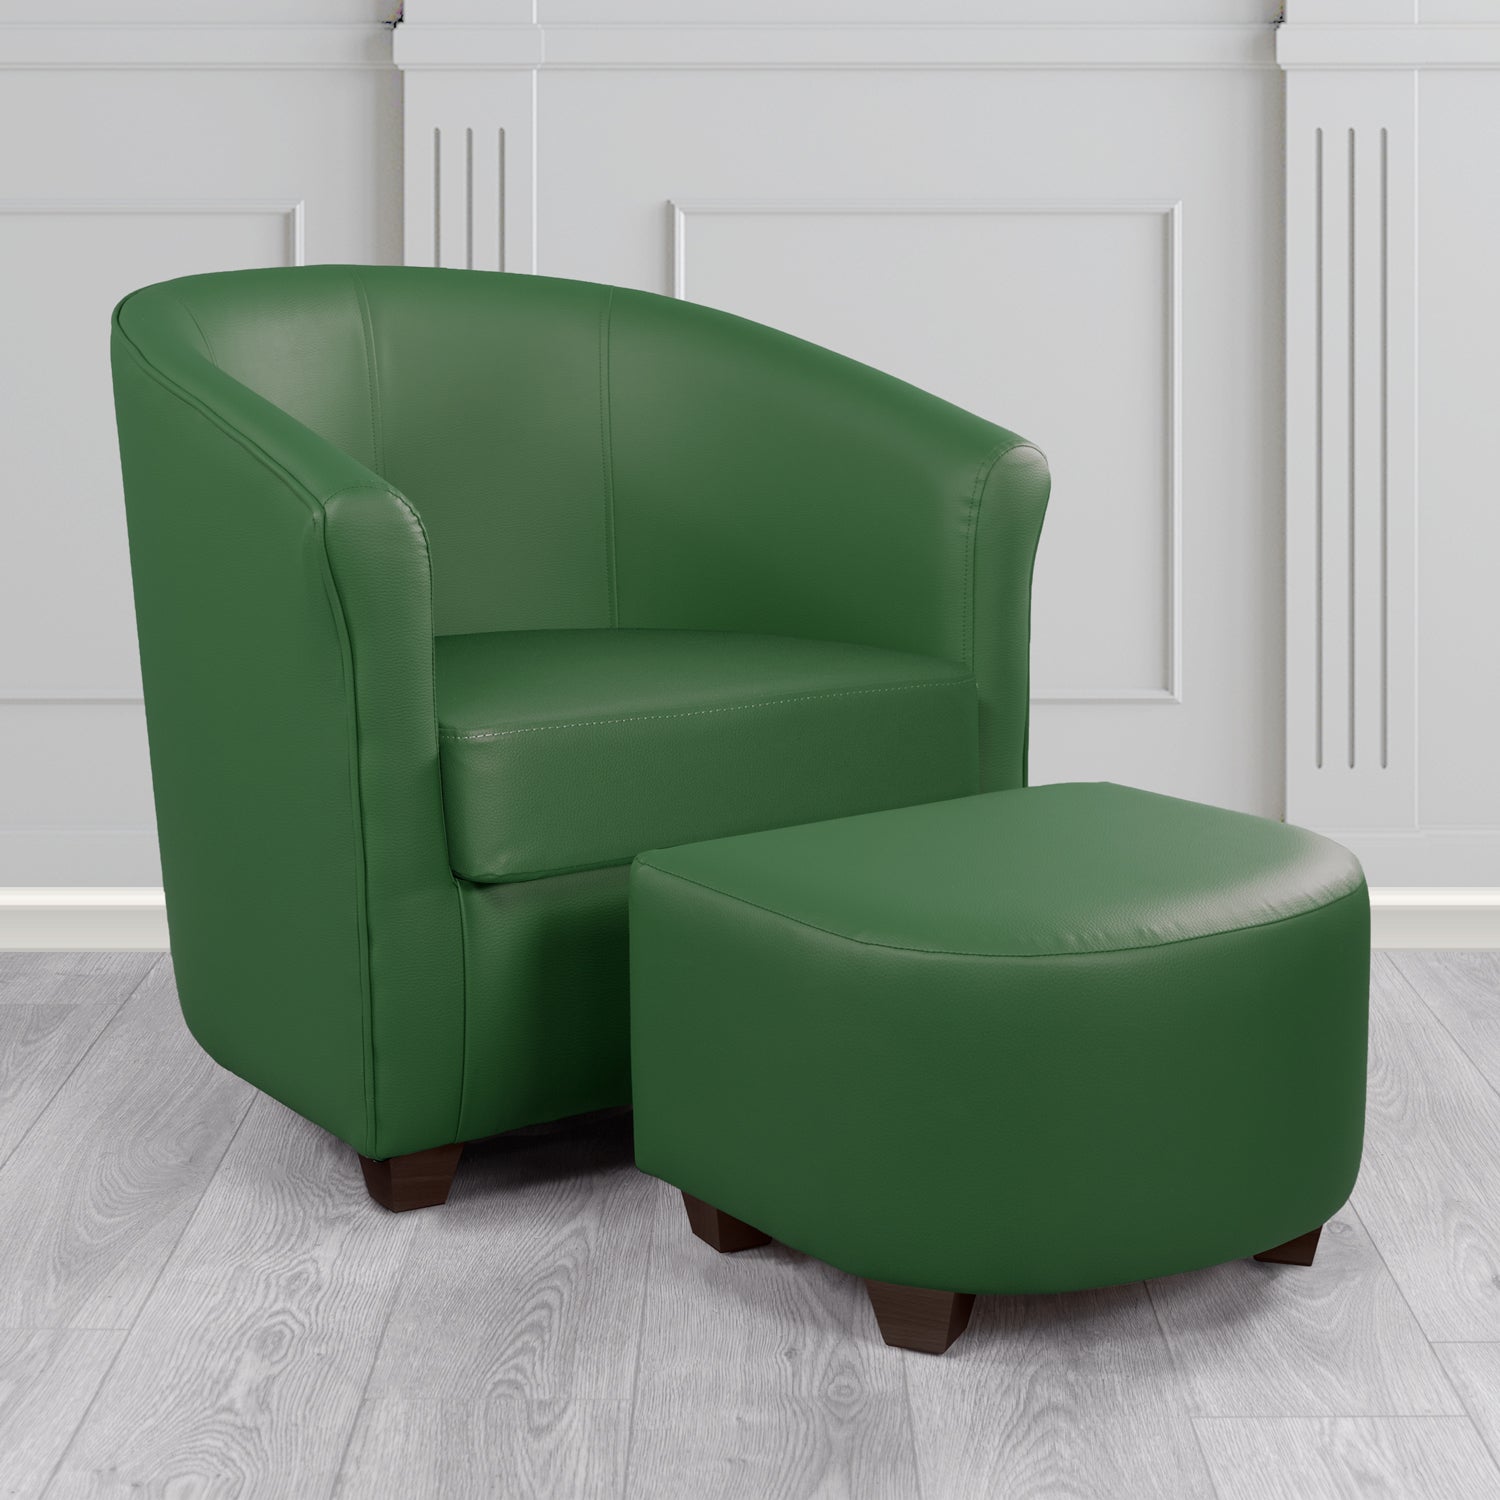 Cannes Tub Chair with Footstool Set in Just Colour Rainforest Crib 5 Faux Leather - The Tub Chair Shop